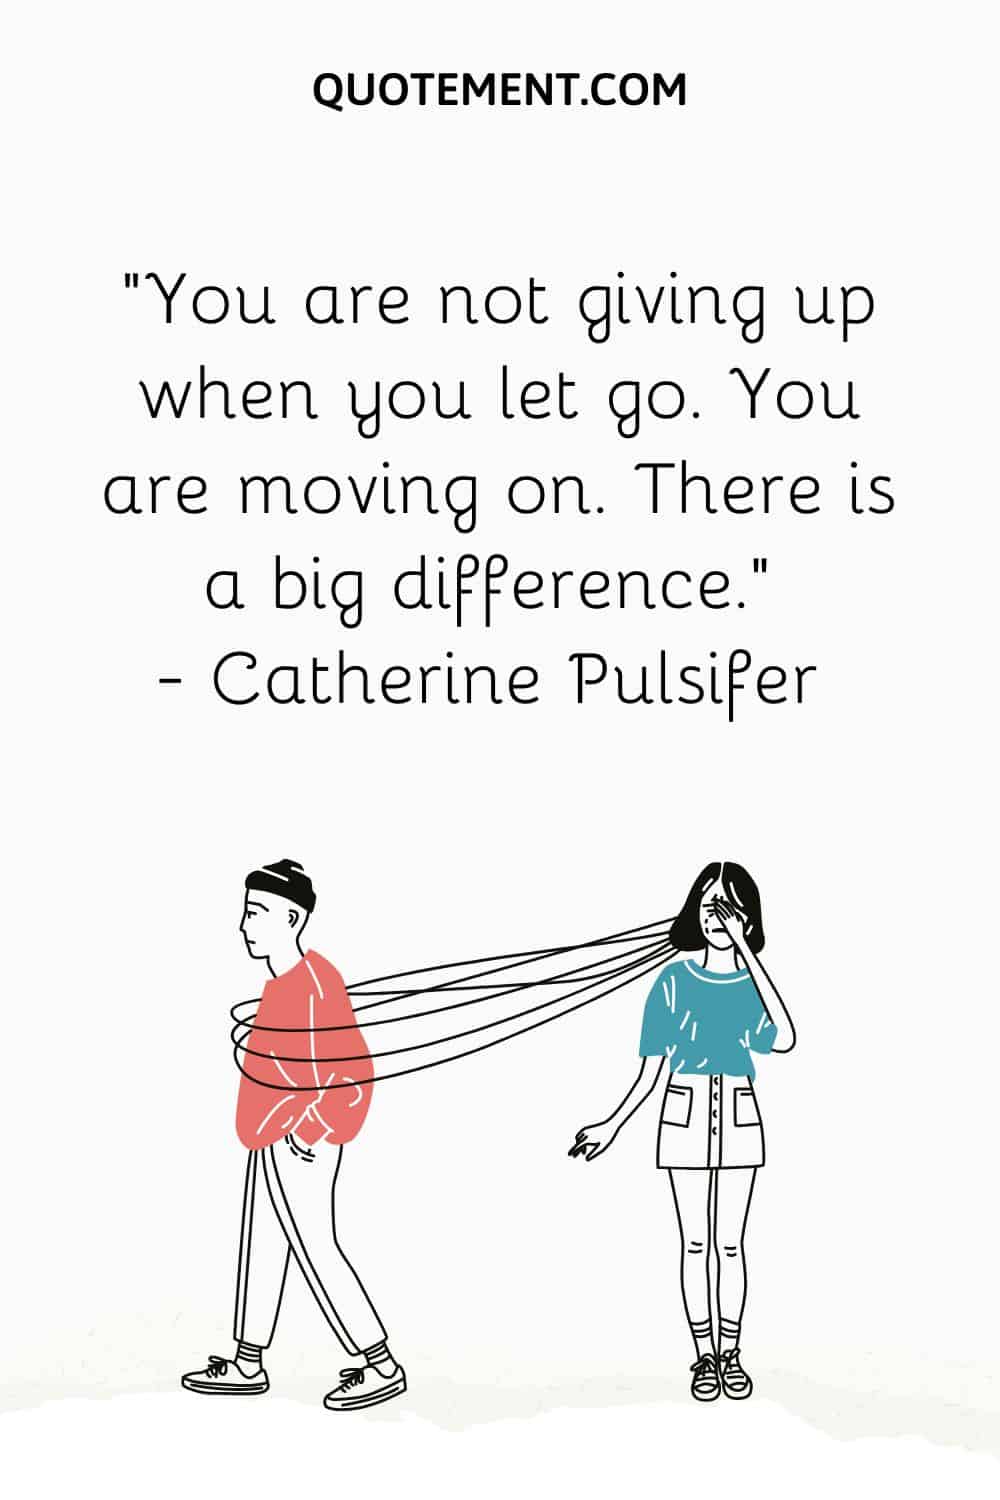 You are not giving up when you let go. You are moving on